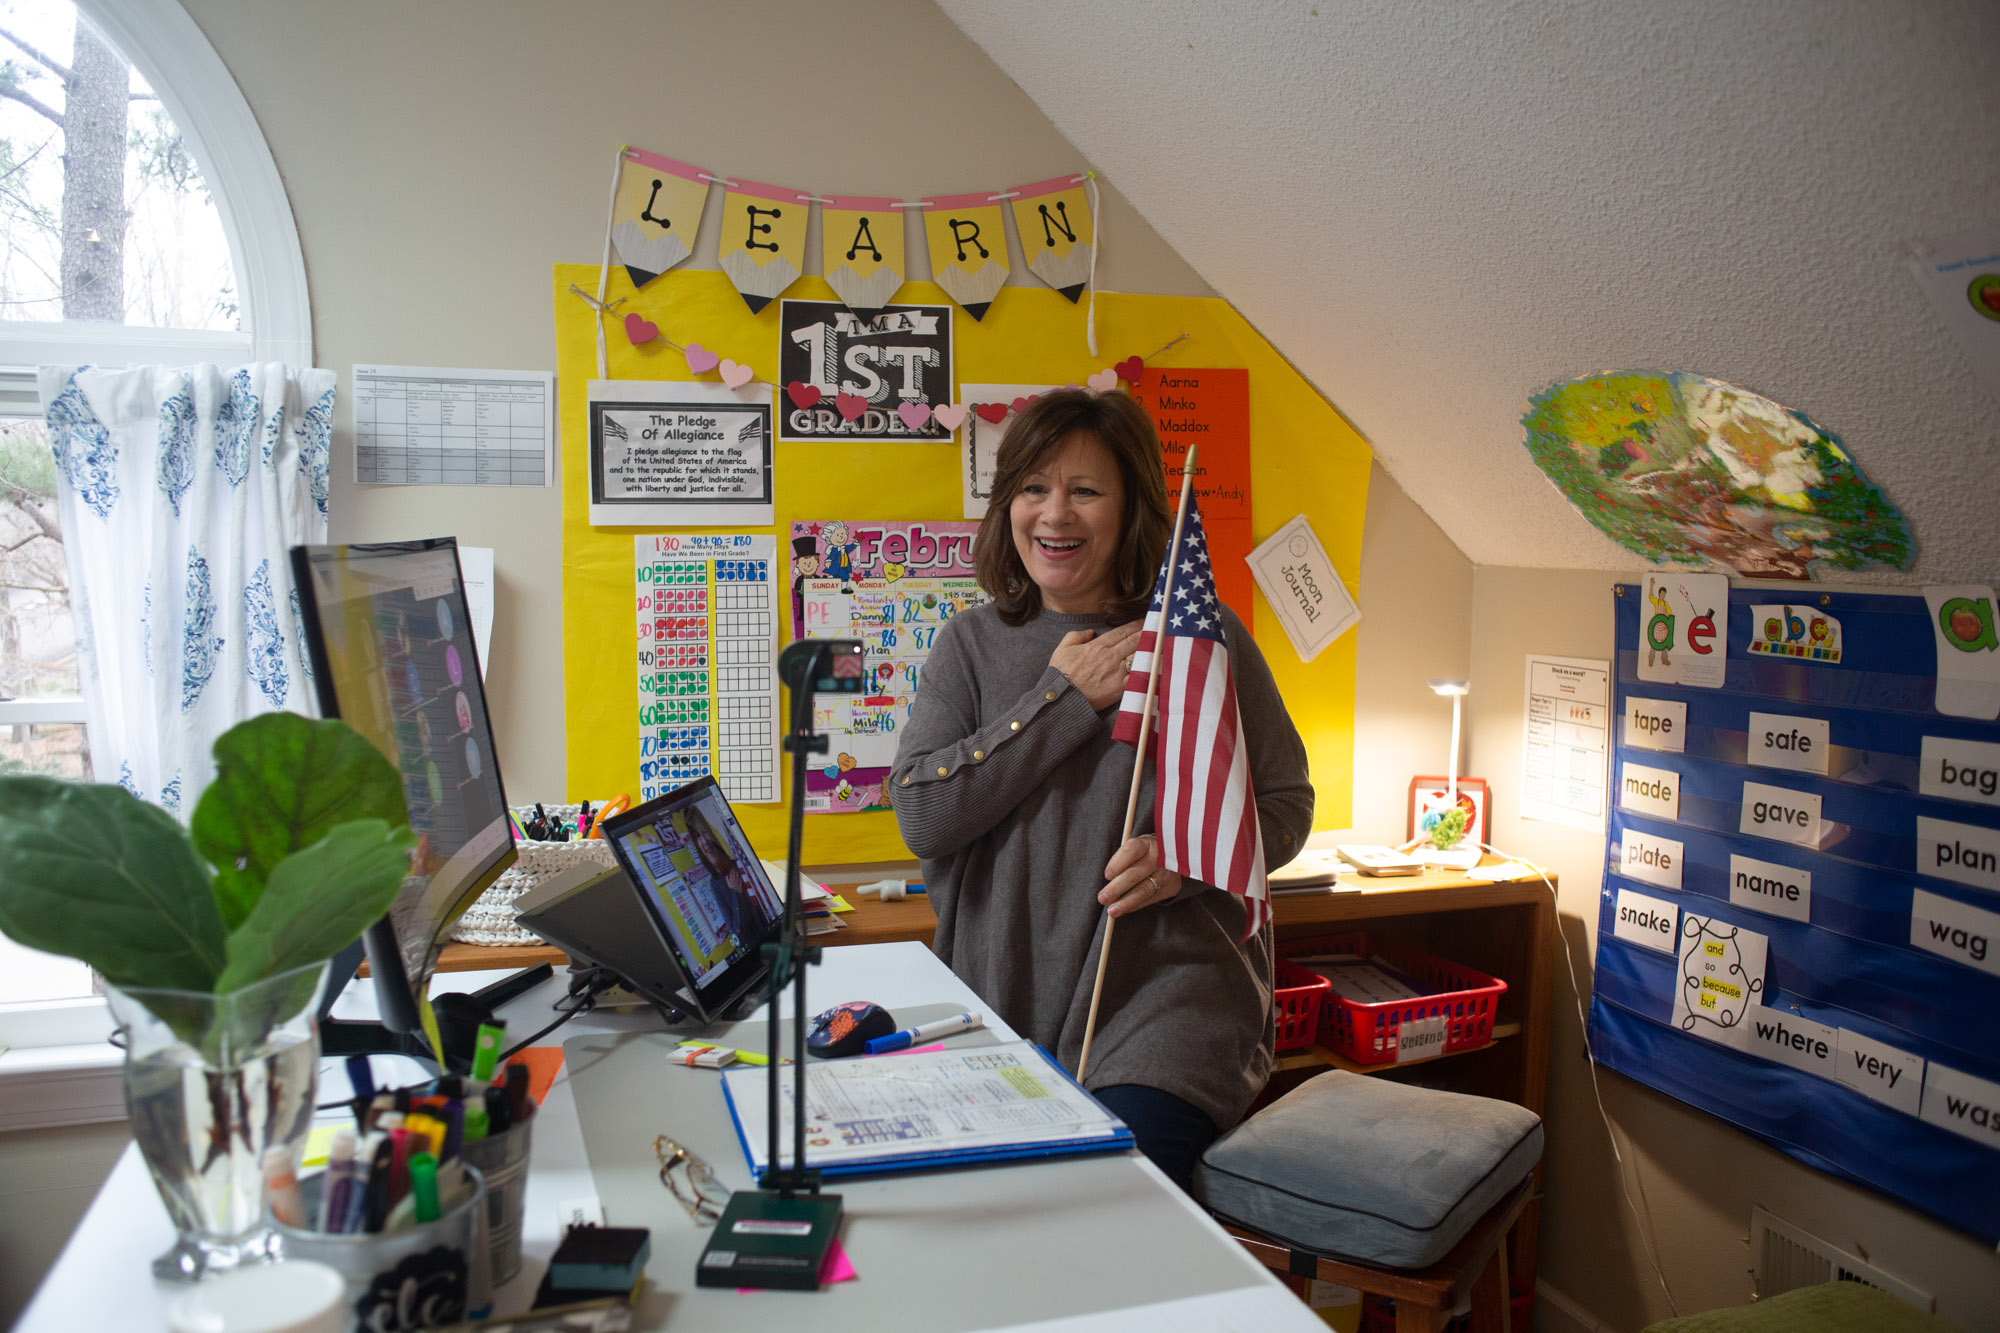 Suzanne Zaccardo holds an American flag in front of her computer to lead her online class in the Pledge of Allegiance